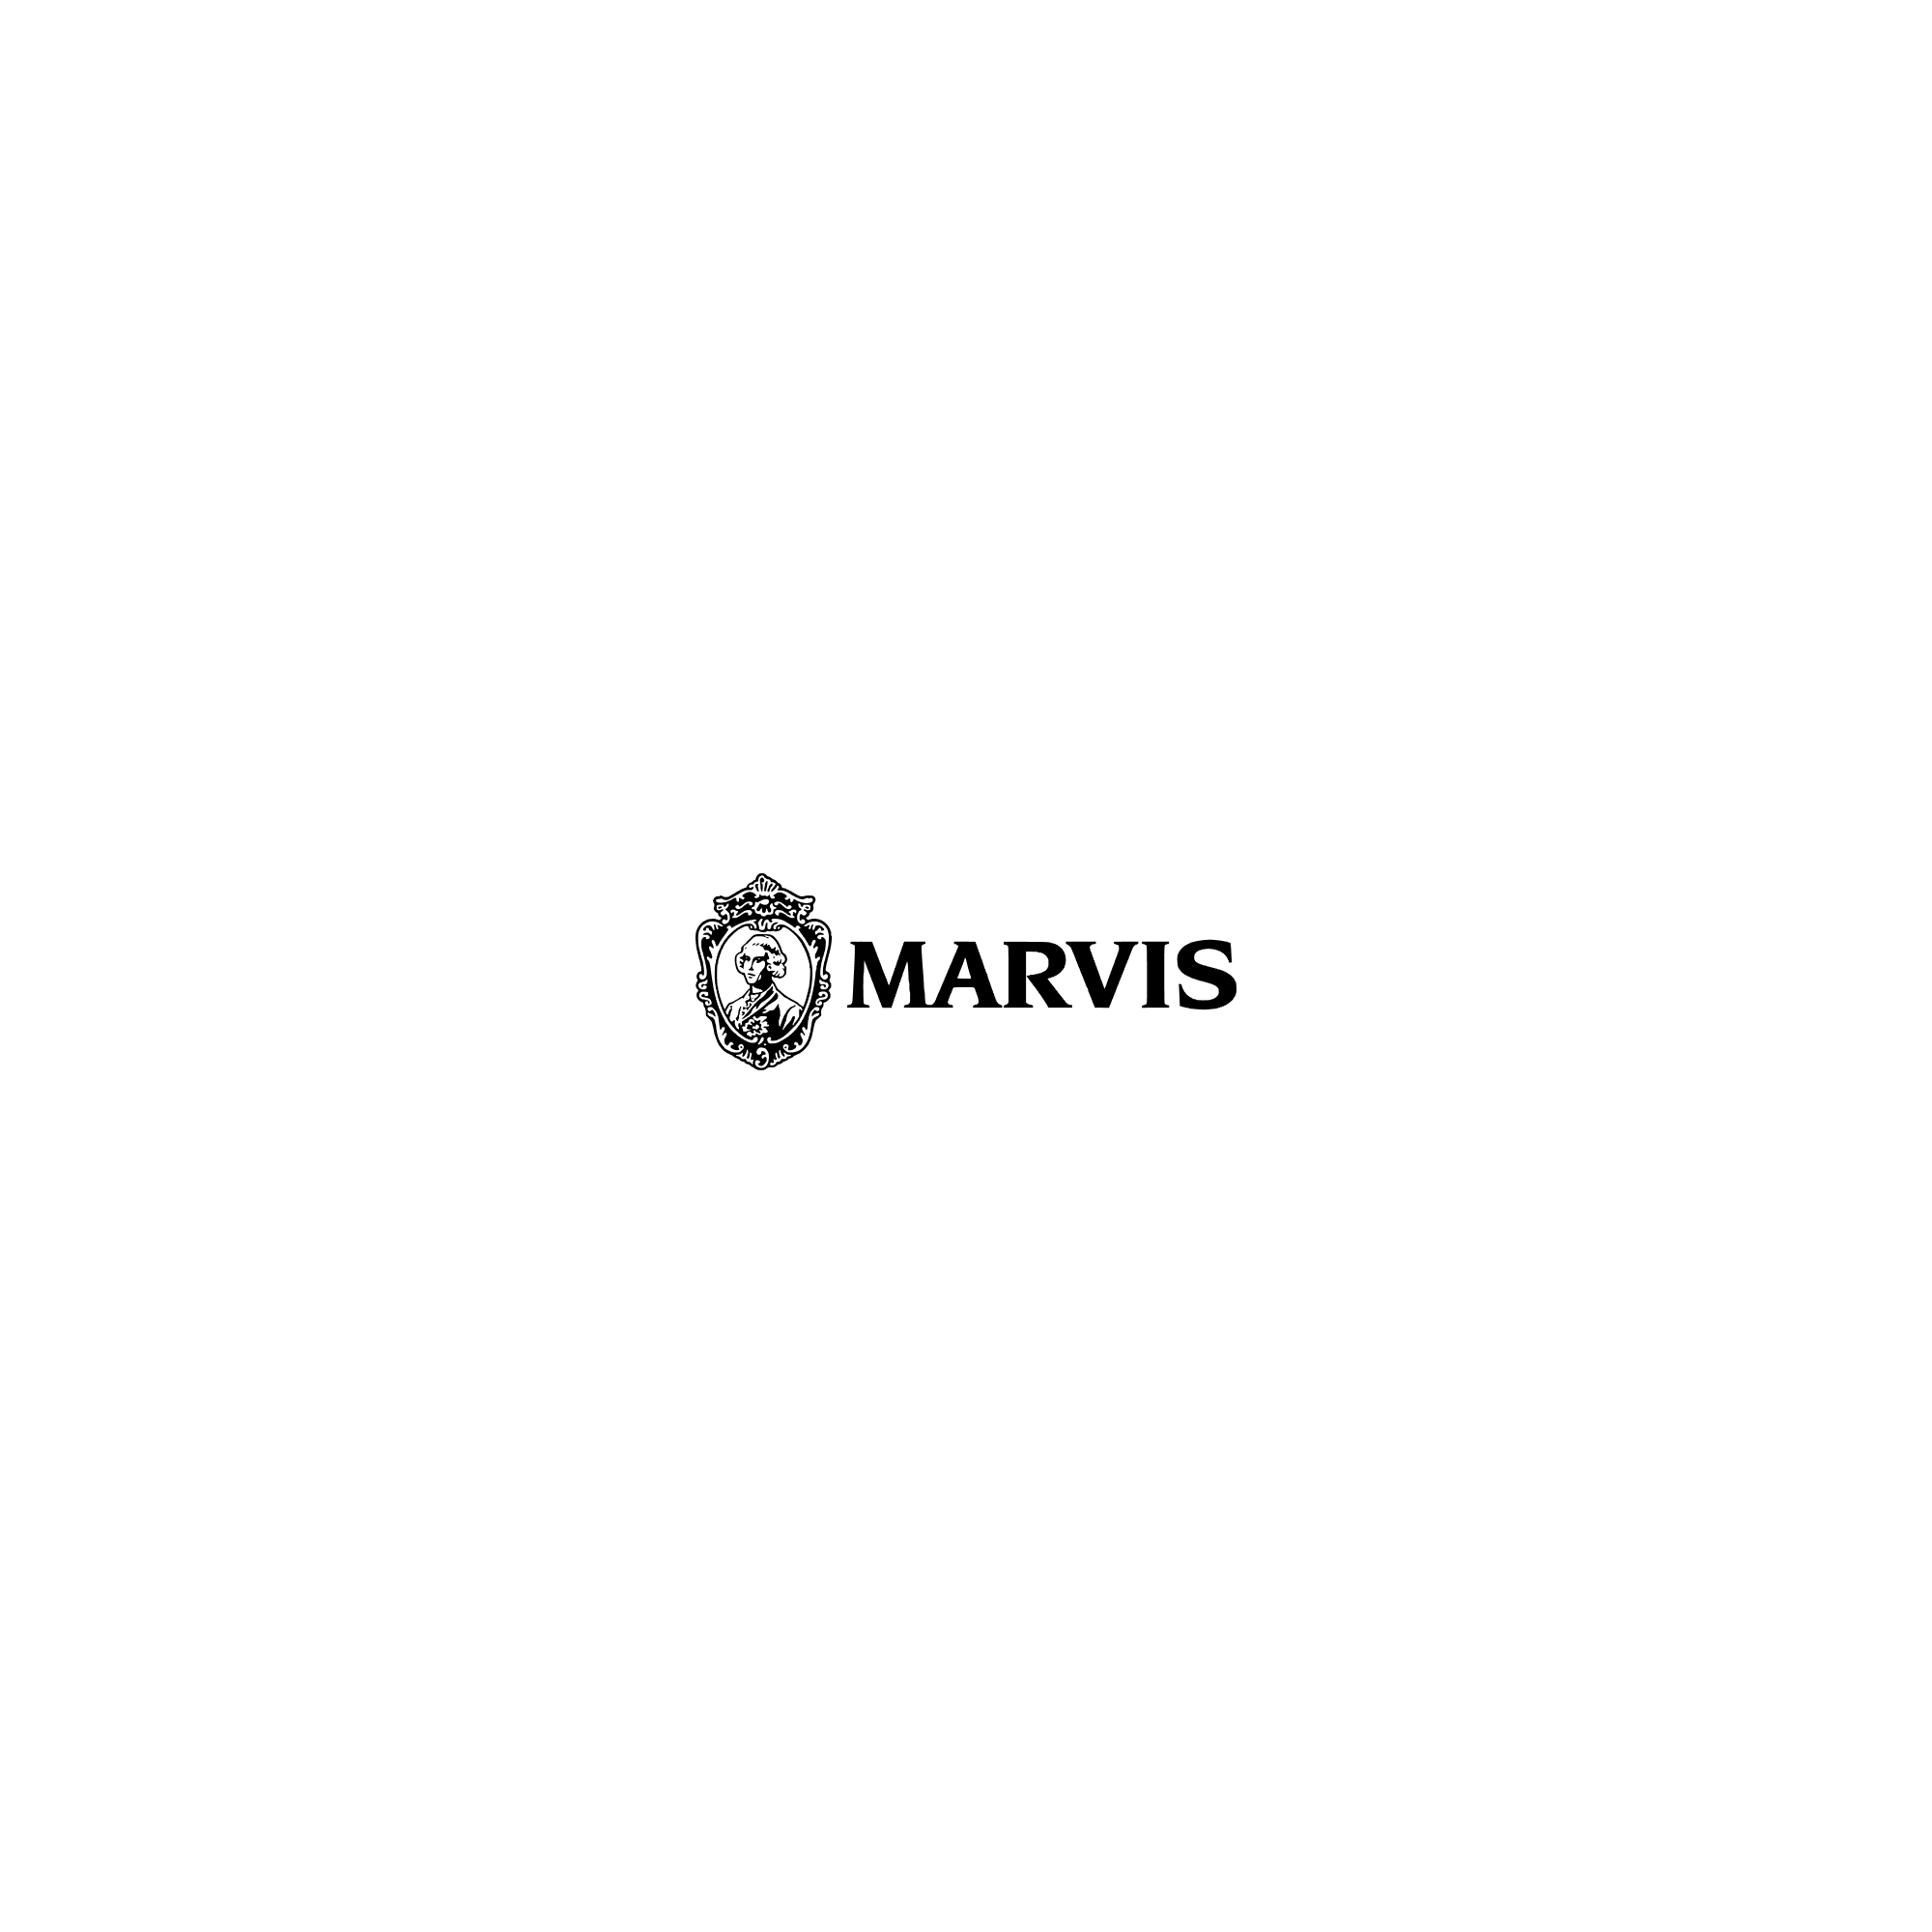 Marvis